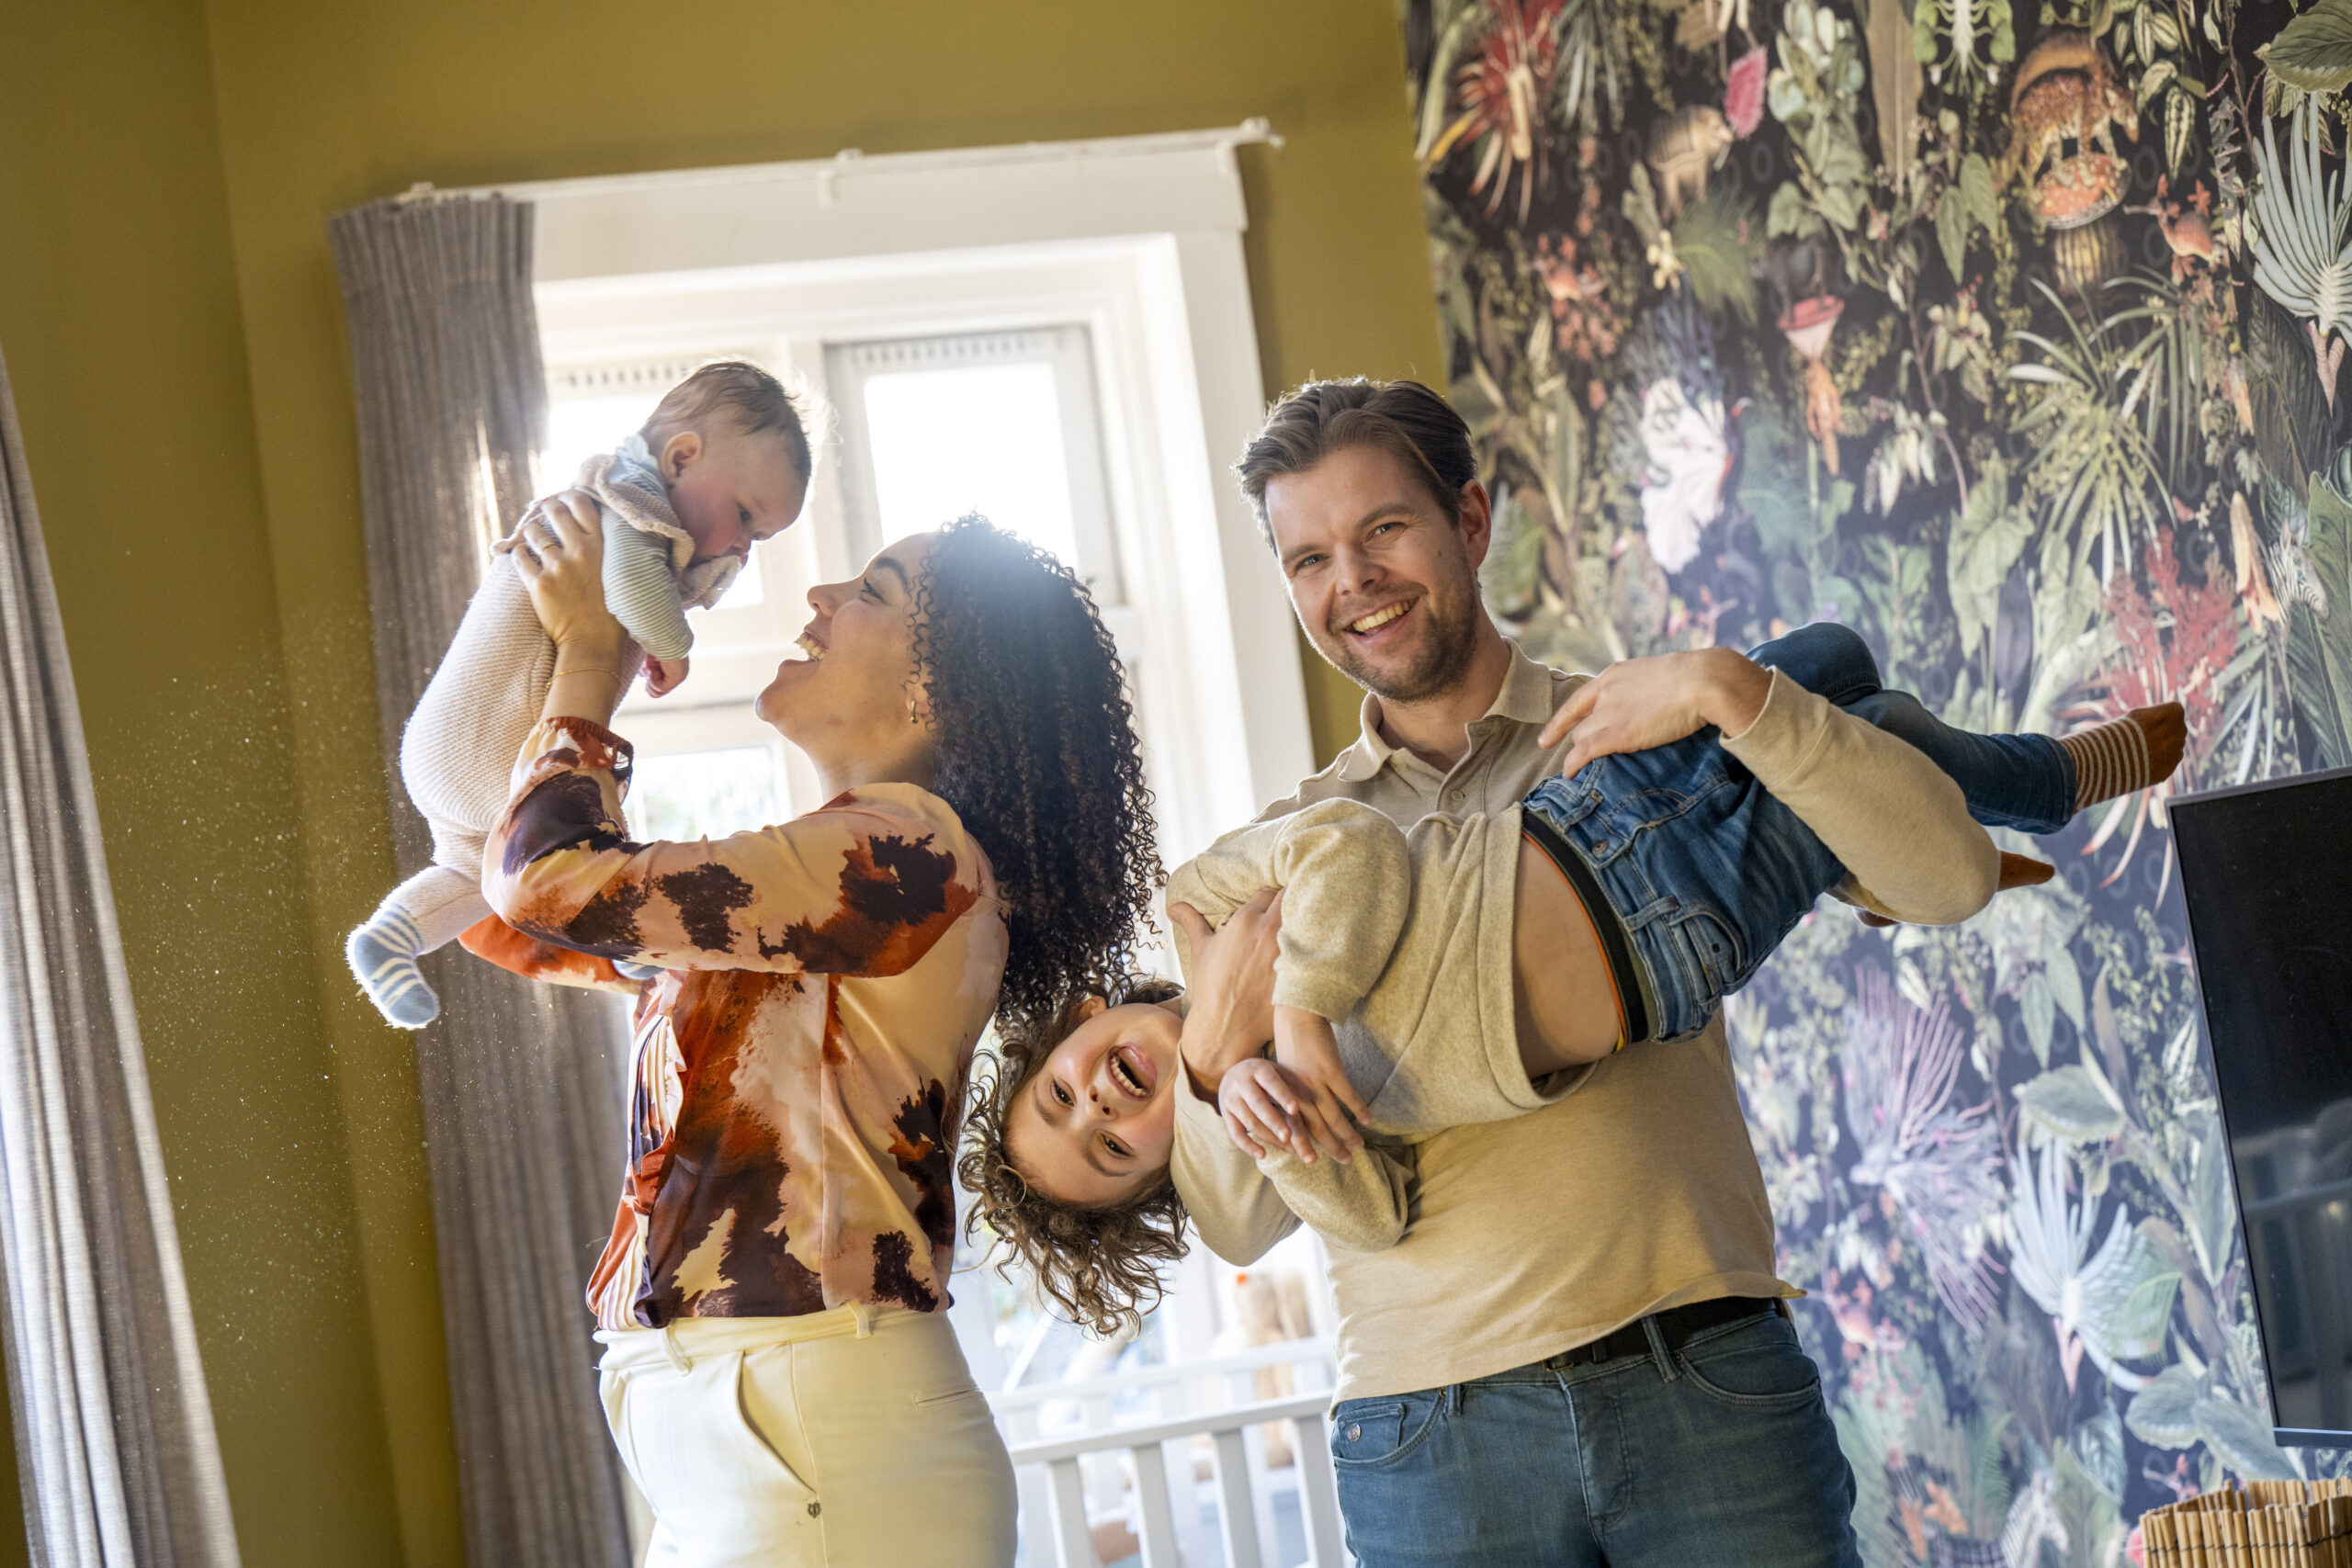 Family fun time with playful parents lifting happy children in a sunlit home